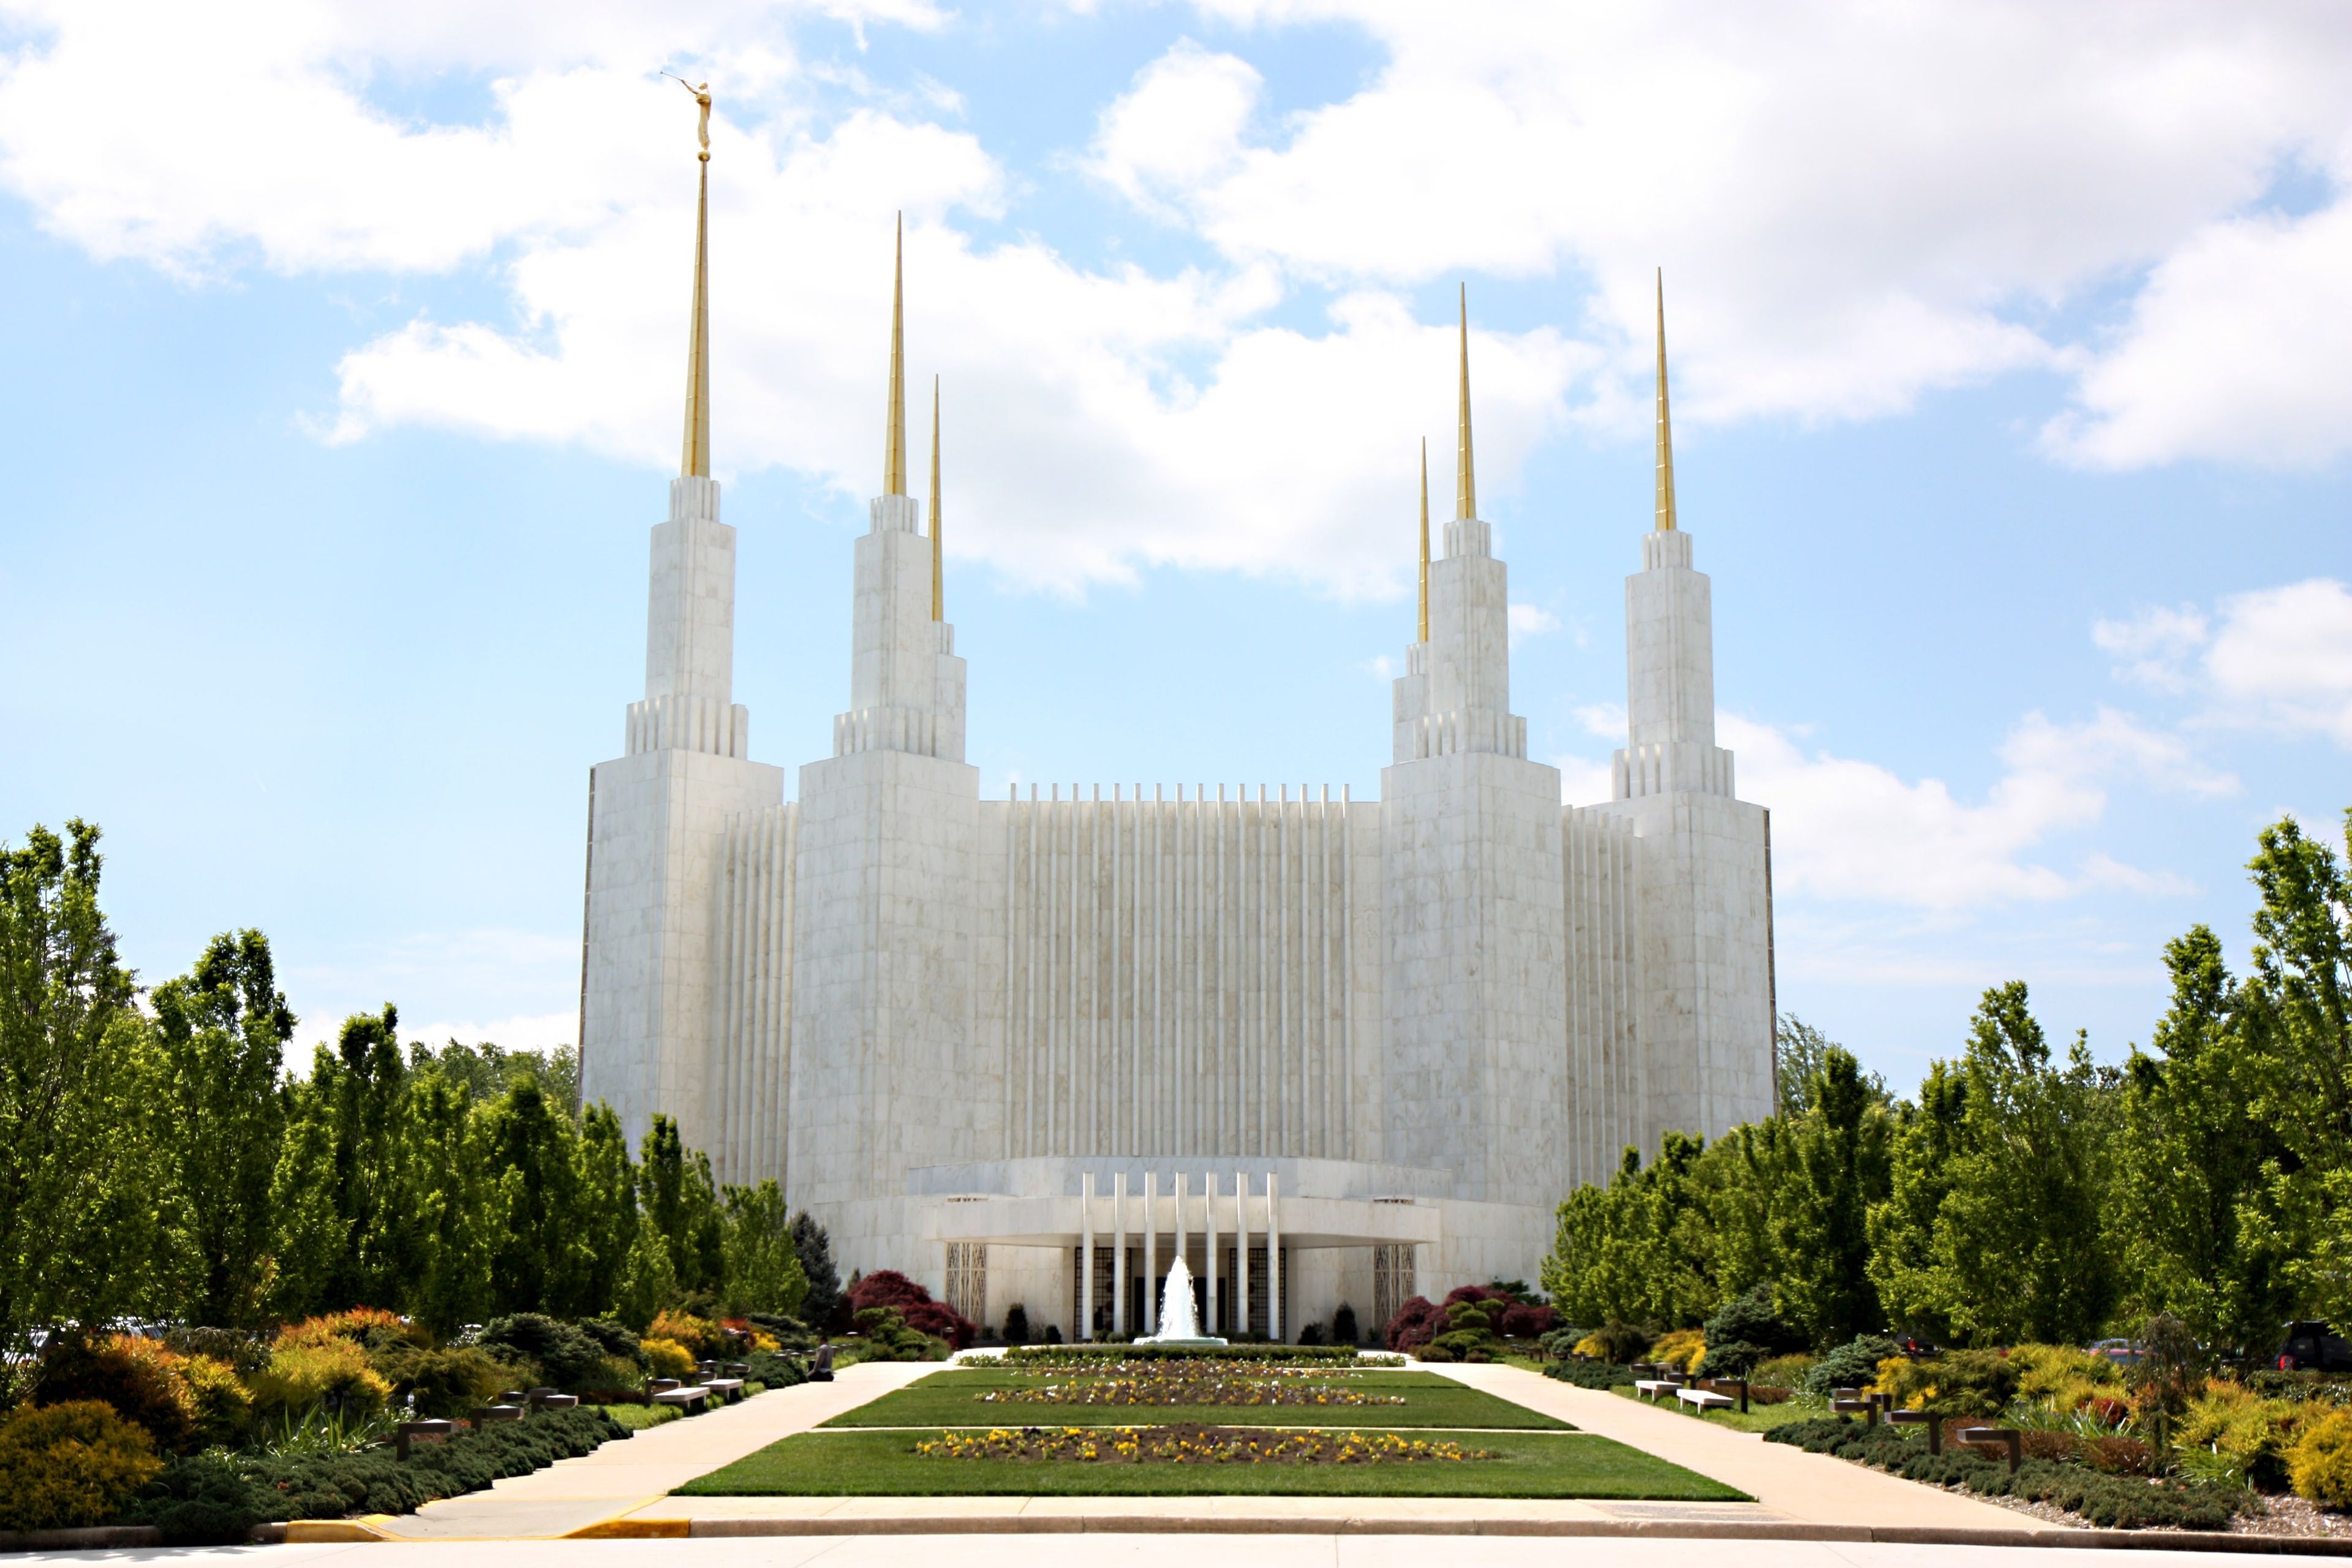 The entire Washington D.C. Temple, including the entrance and scenery.